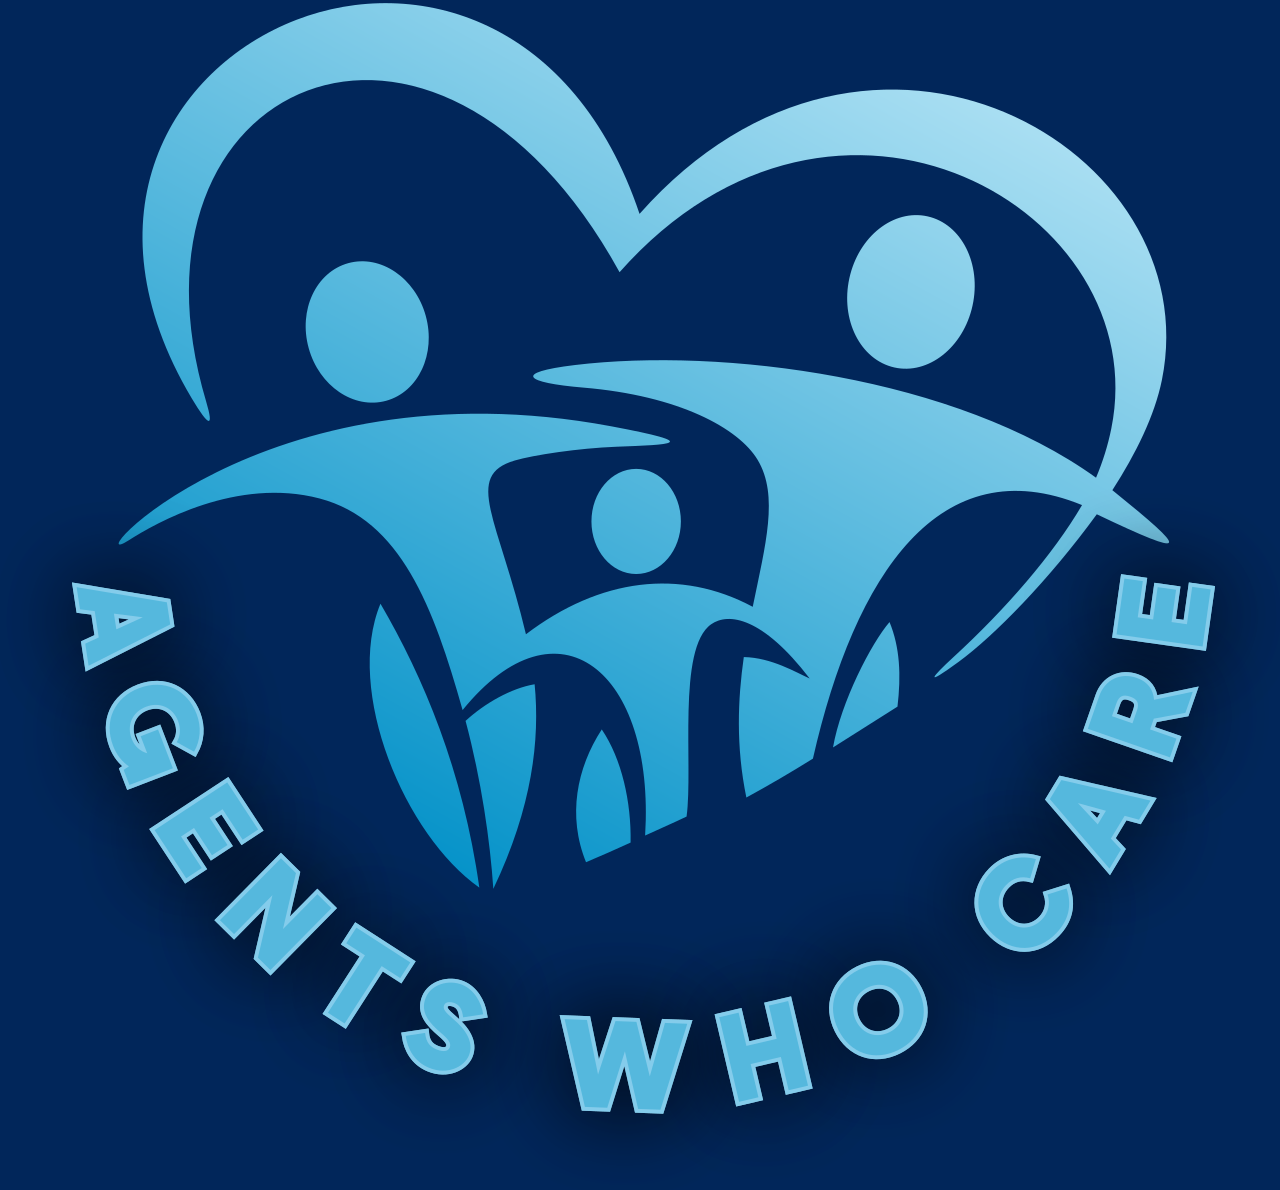 AGENTS WHO CARE's logo